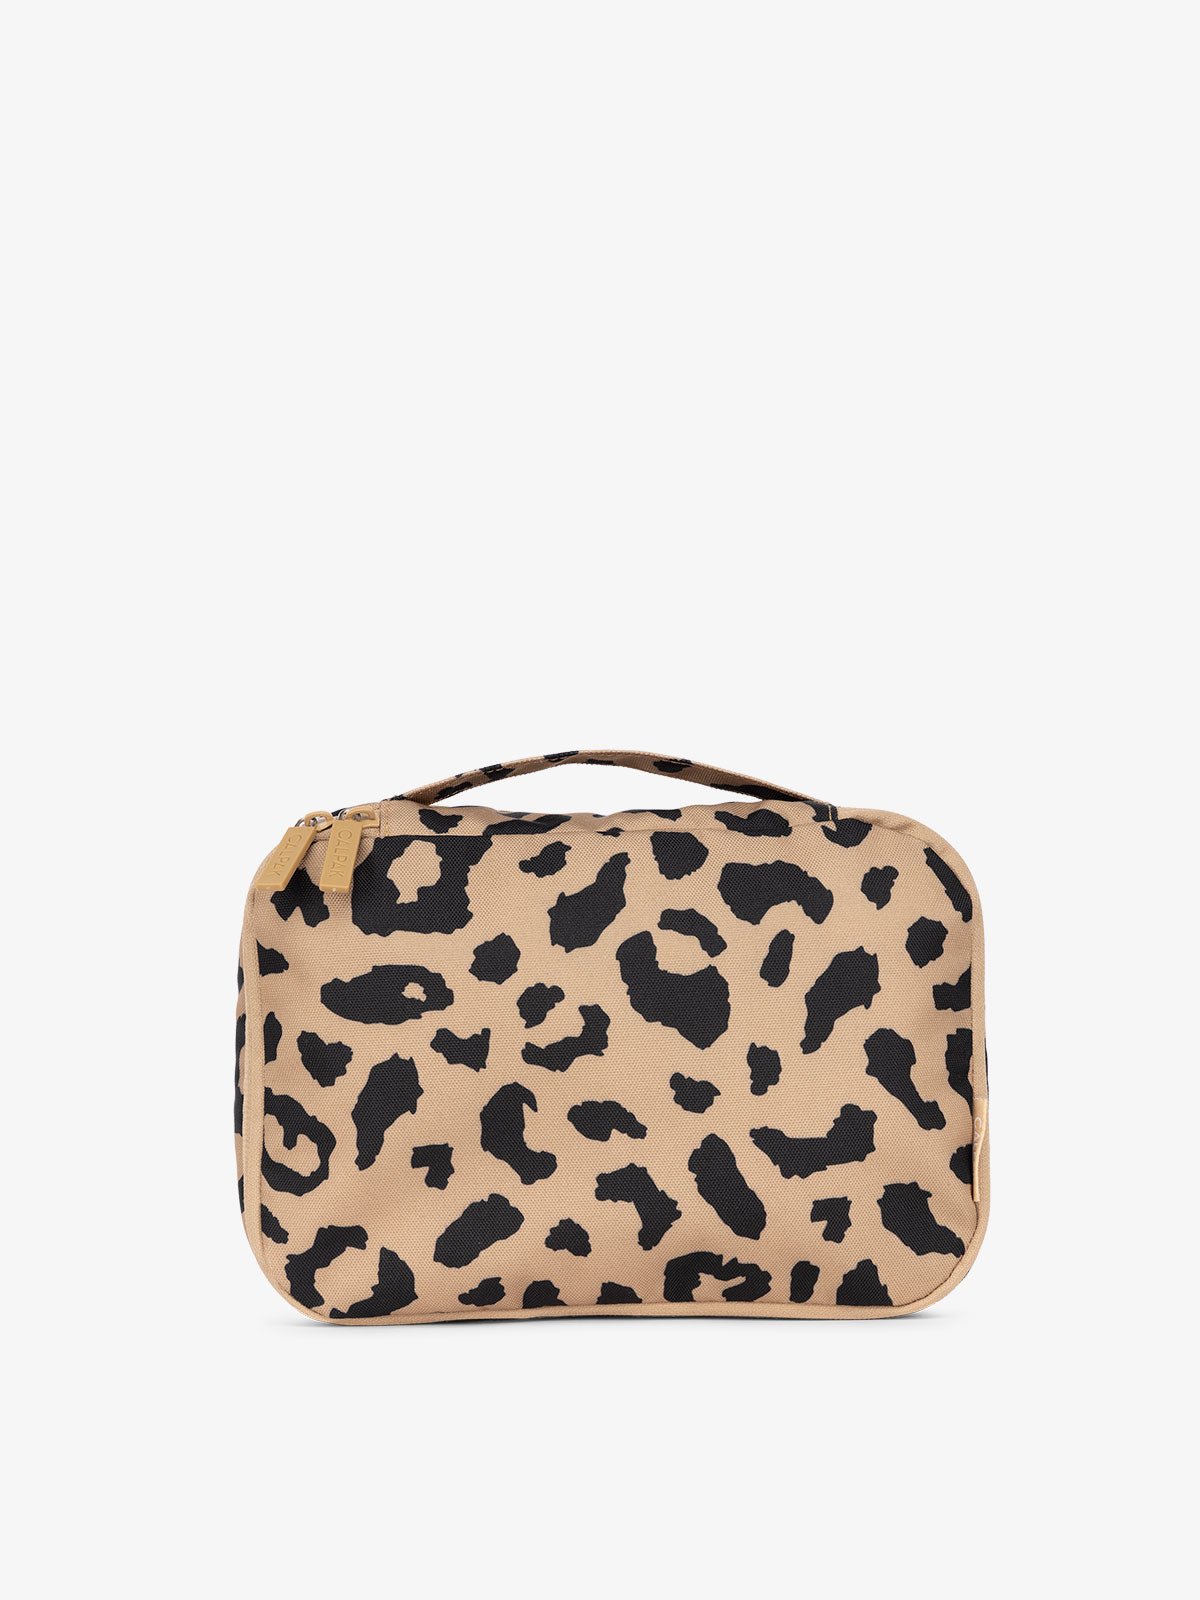 CALPAK small packing cubes with top handle in cheetah print